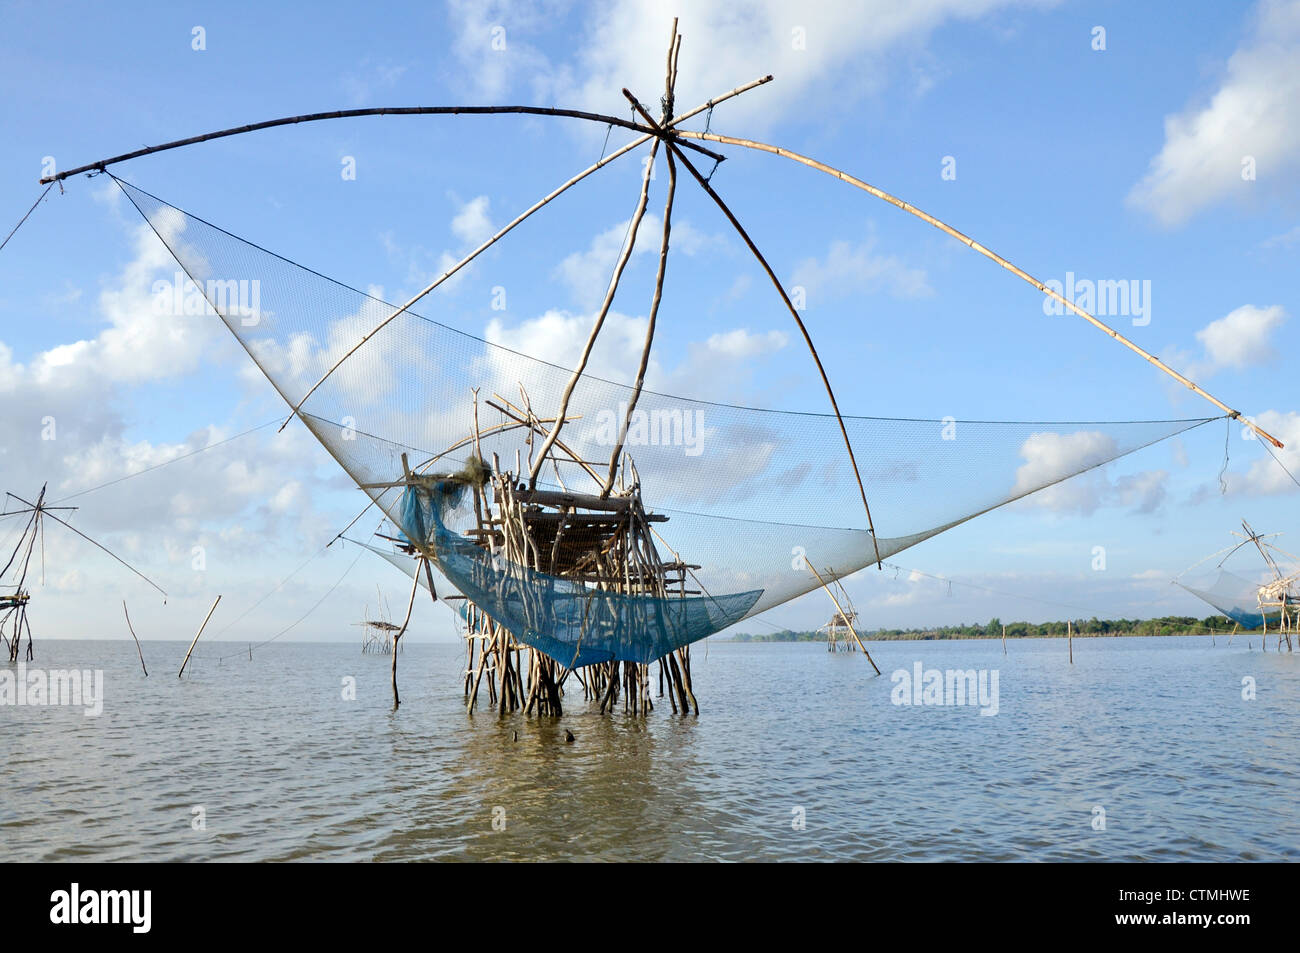 Big square dip net in south of Thai sea, traditional style fish